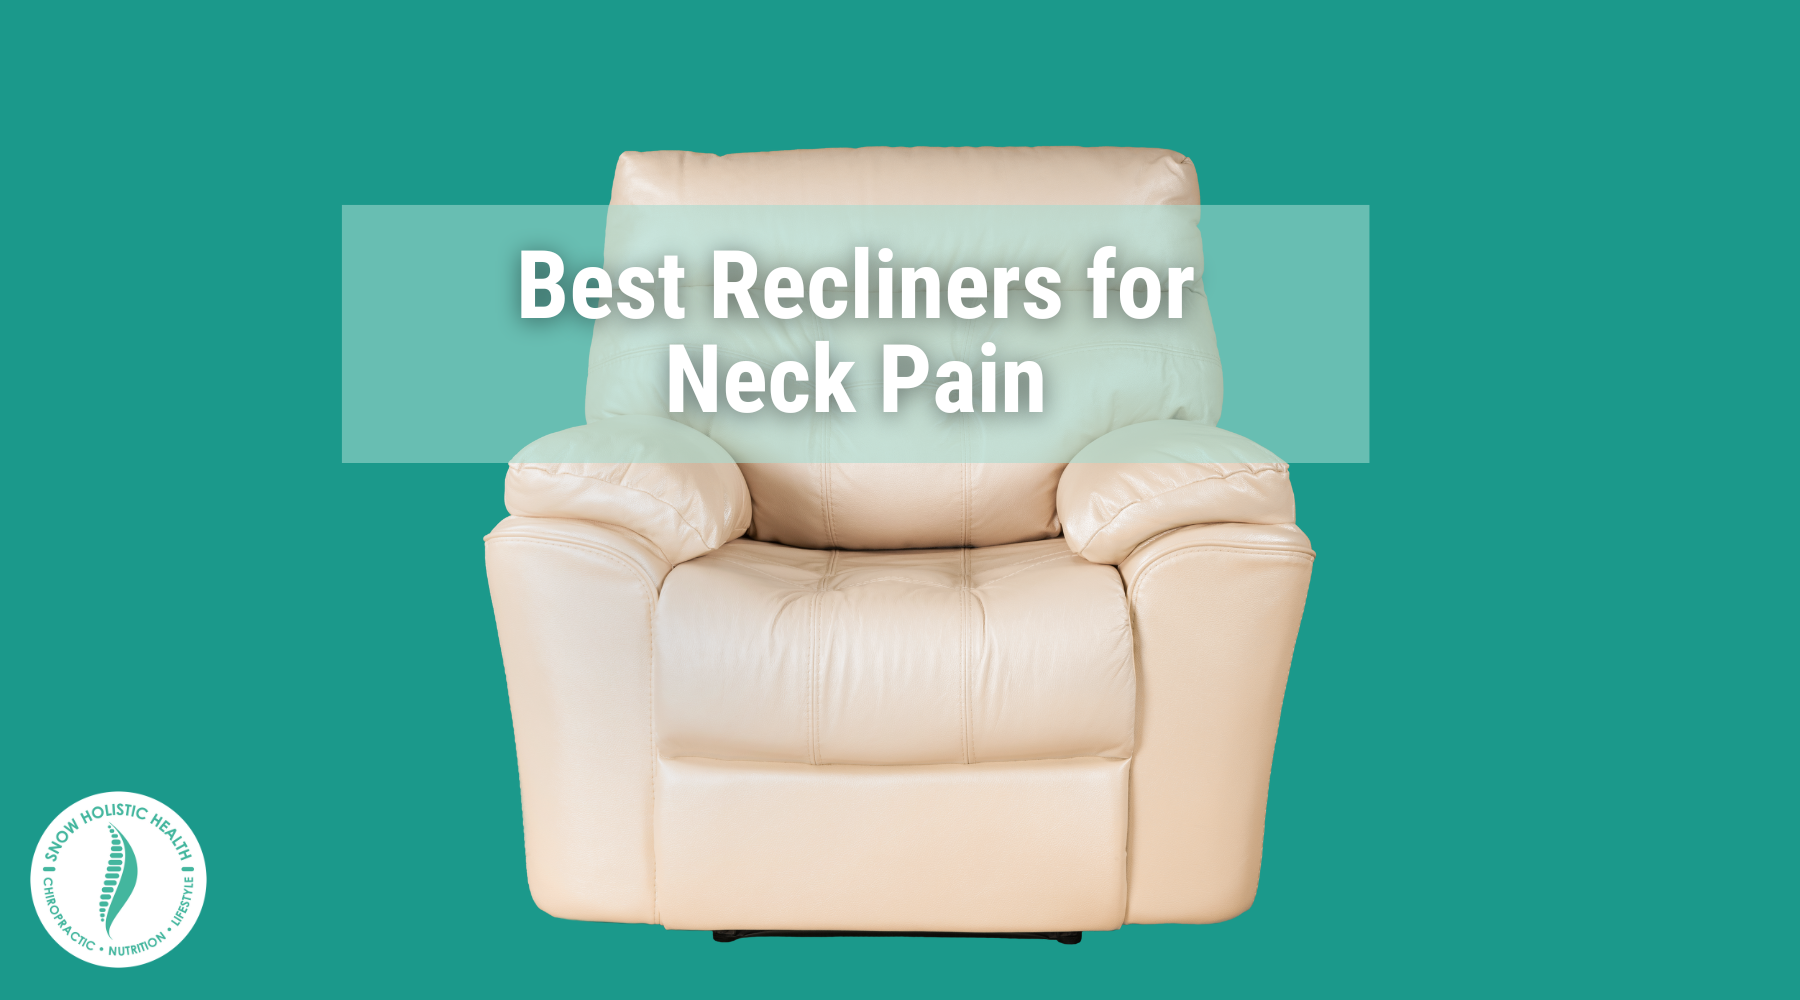 Best Recliners for Neck Pain over image of a white recliner chair